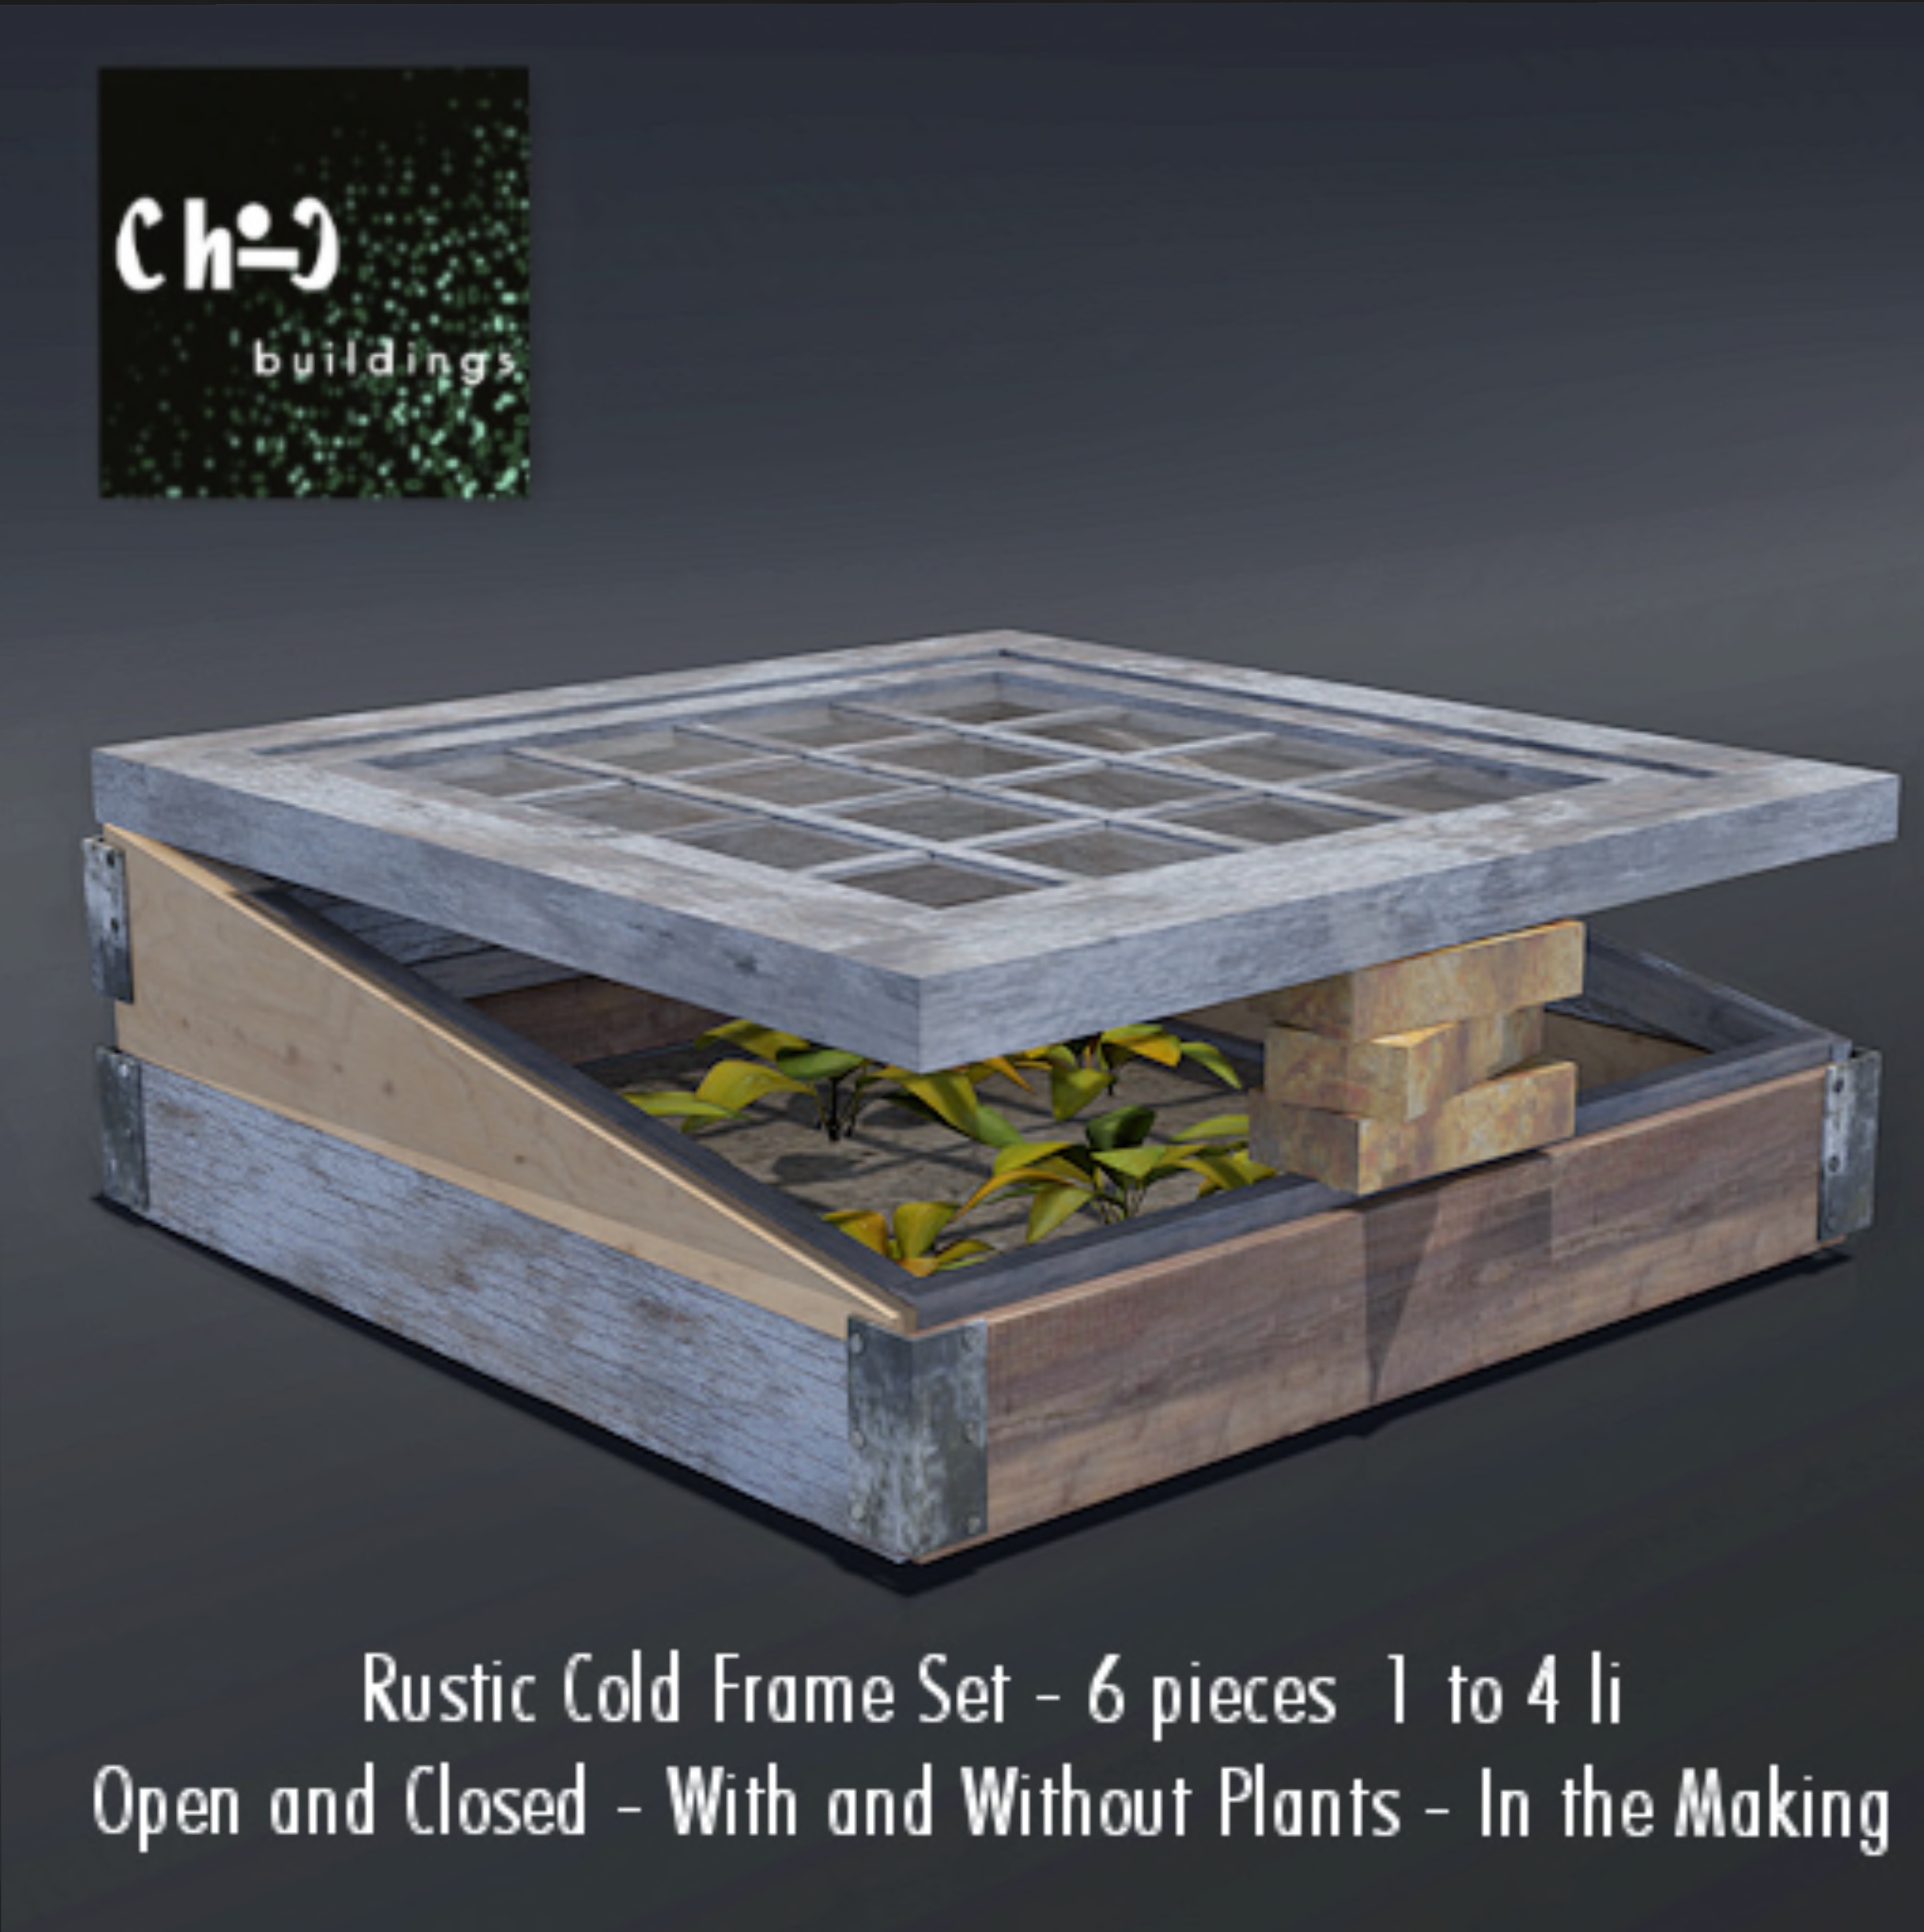 Chic Buildings – Rustic Cold Frame Set